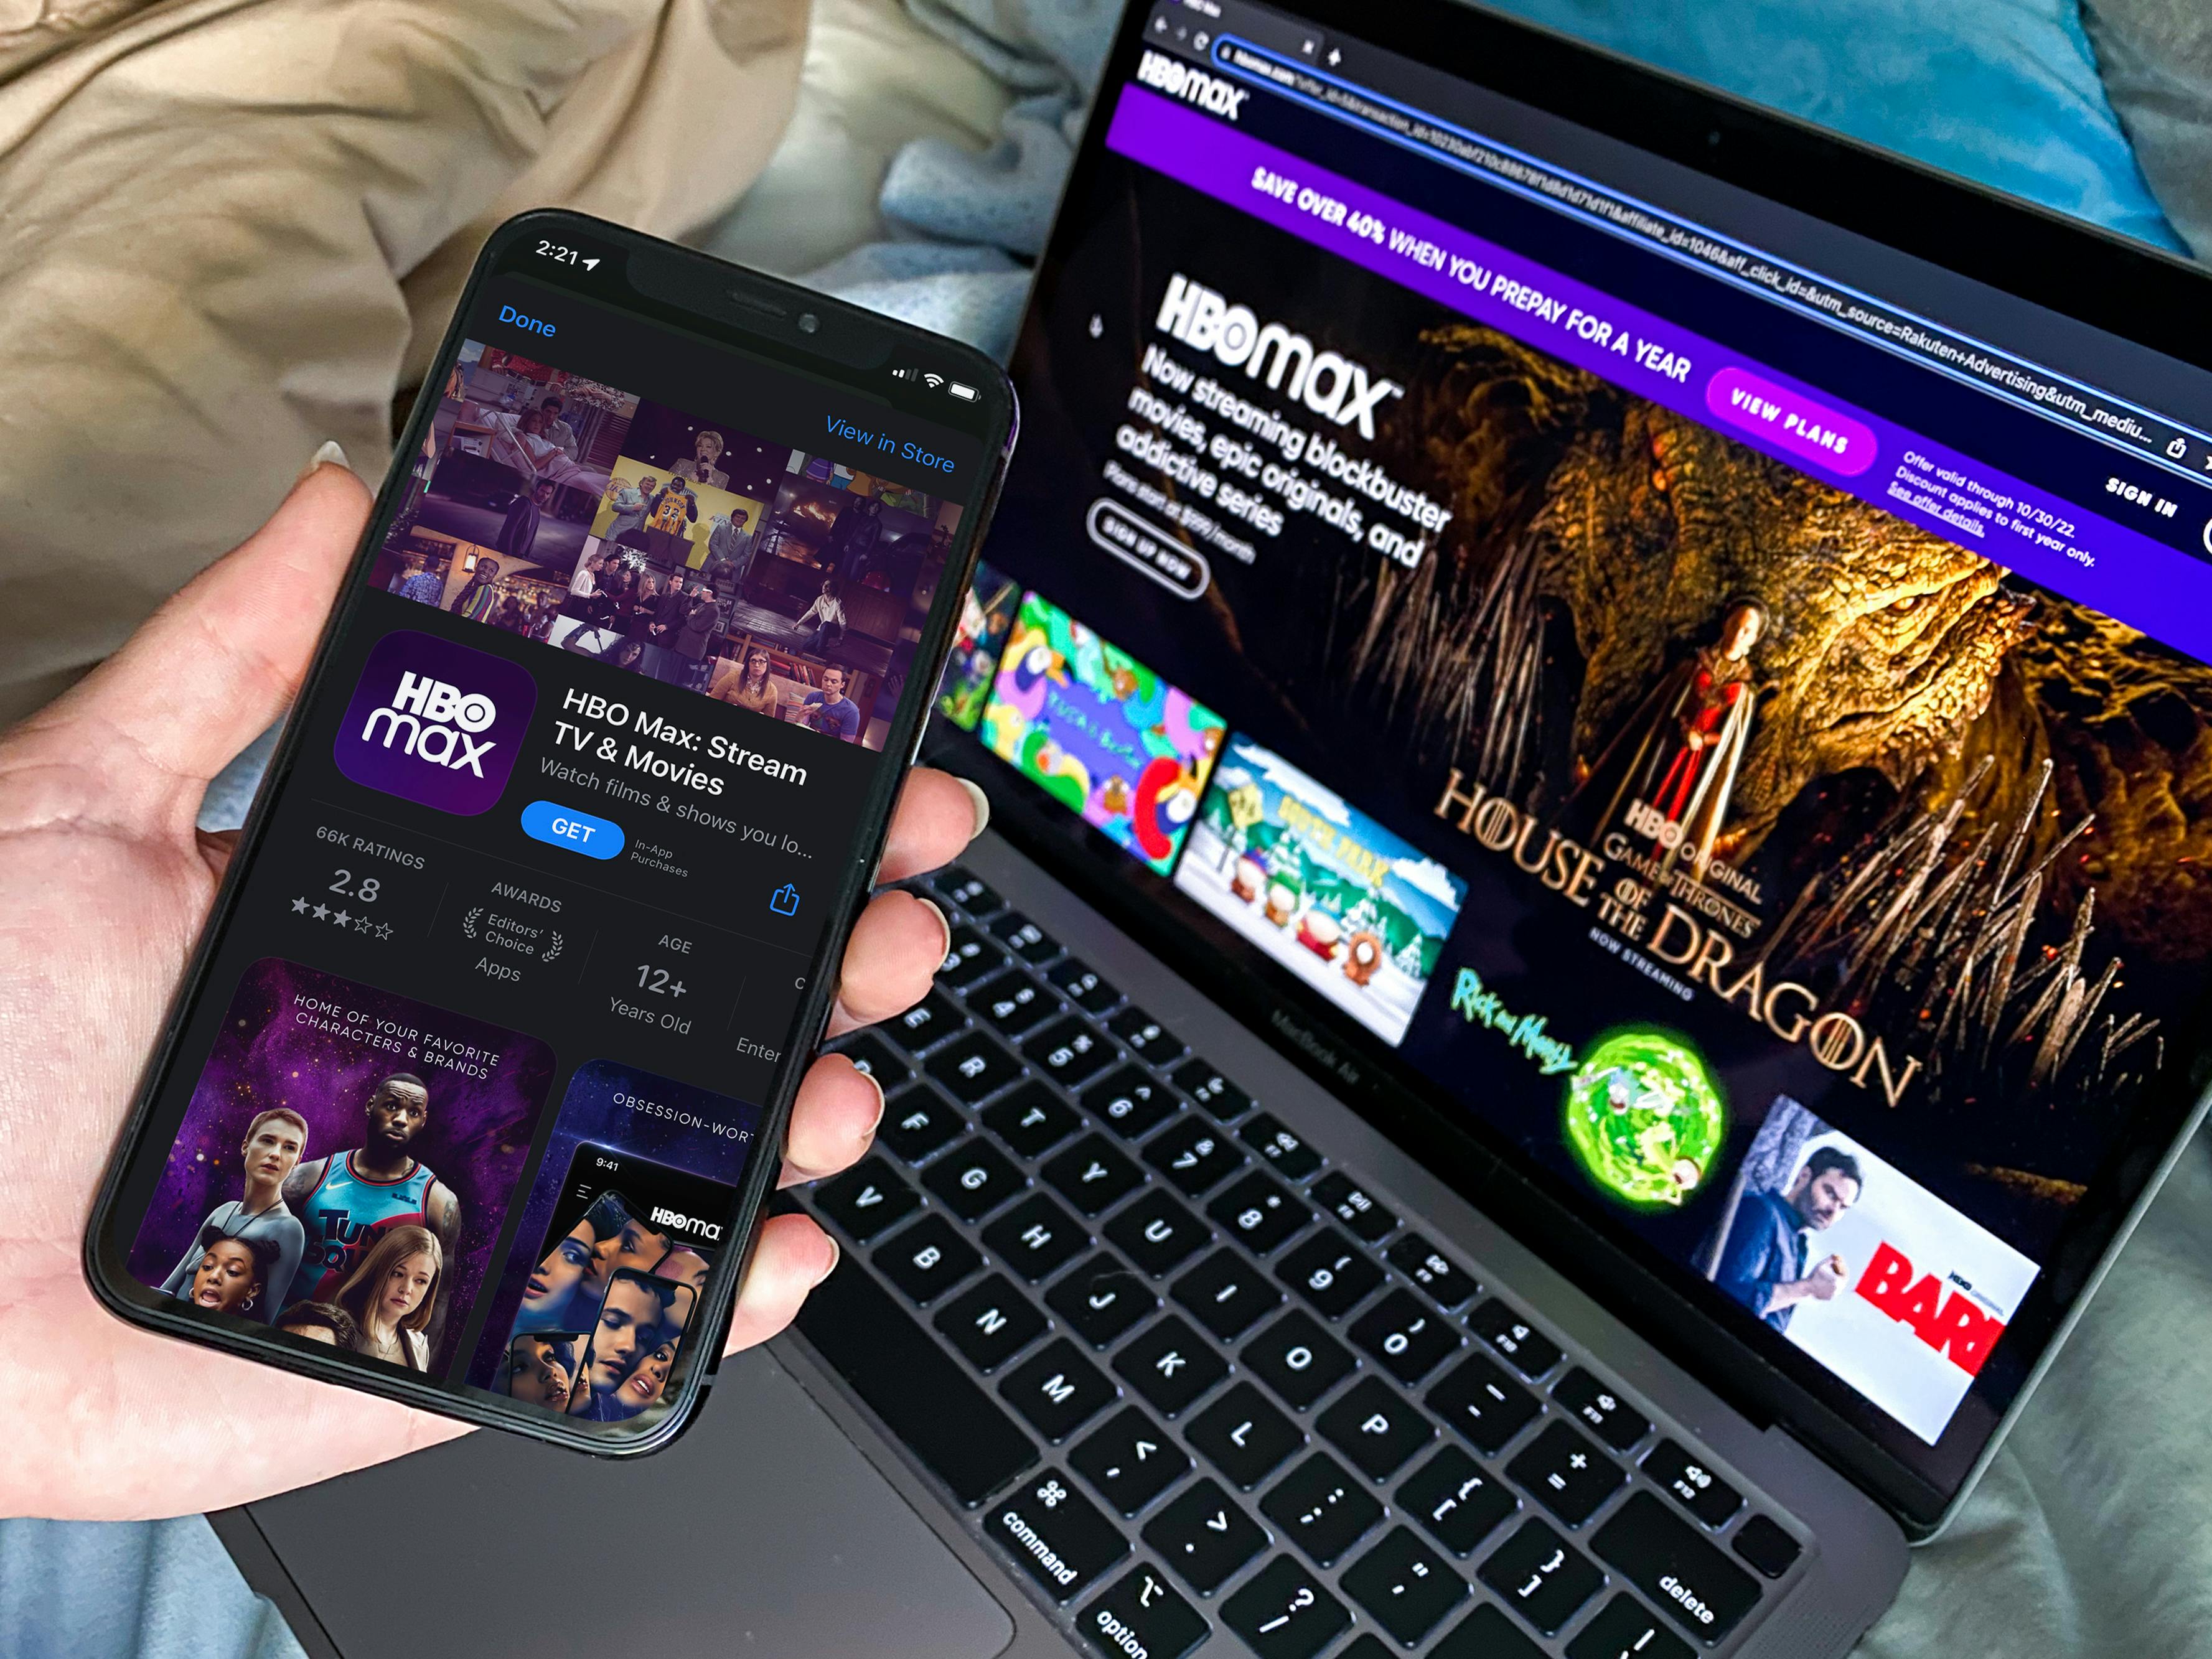 A person's hand holding a phone displaying the HBO Max app download screen near a laptop displaying the banner for House of the Dragon on HBO's website.